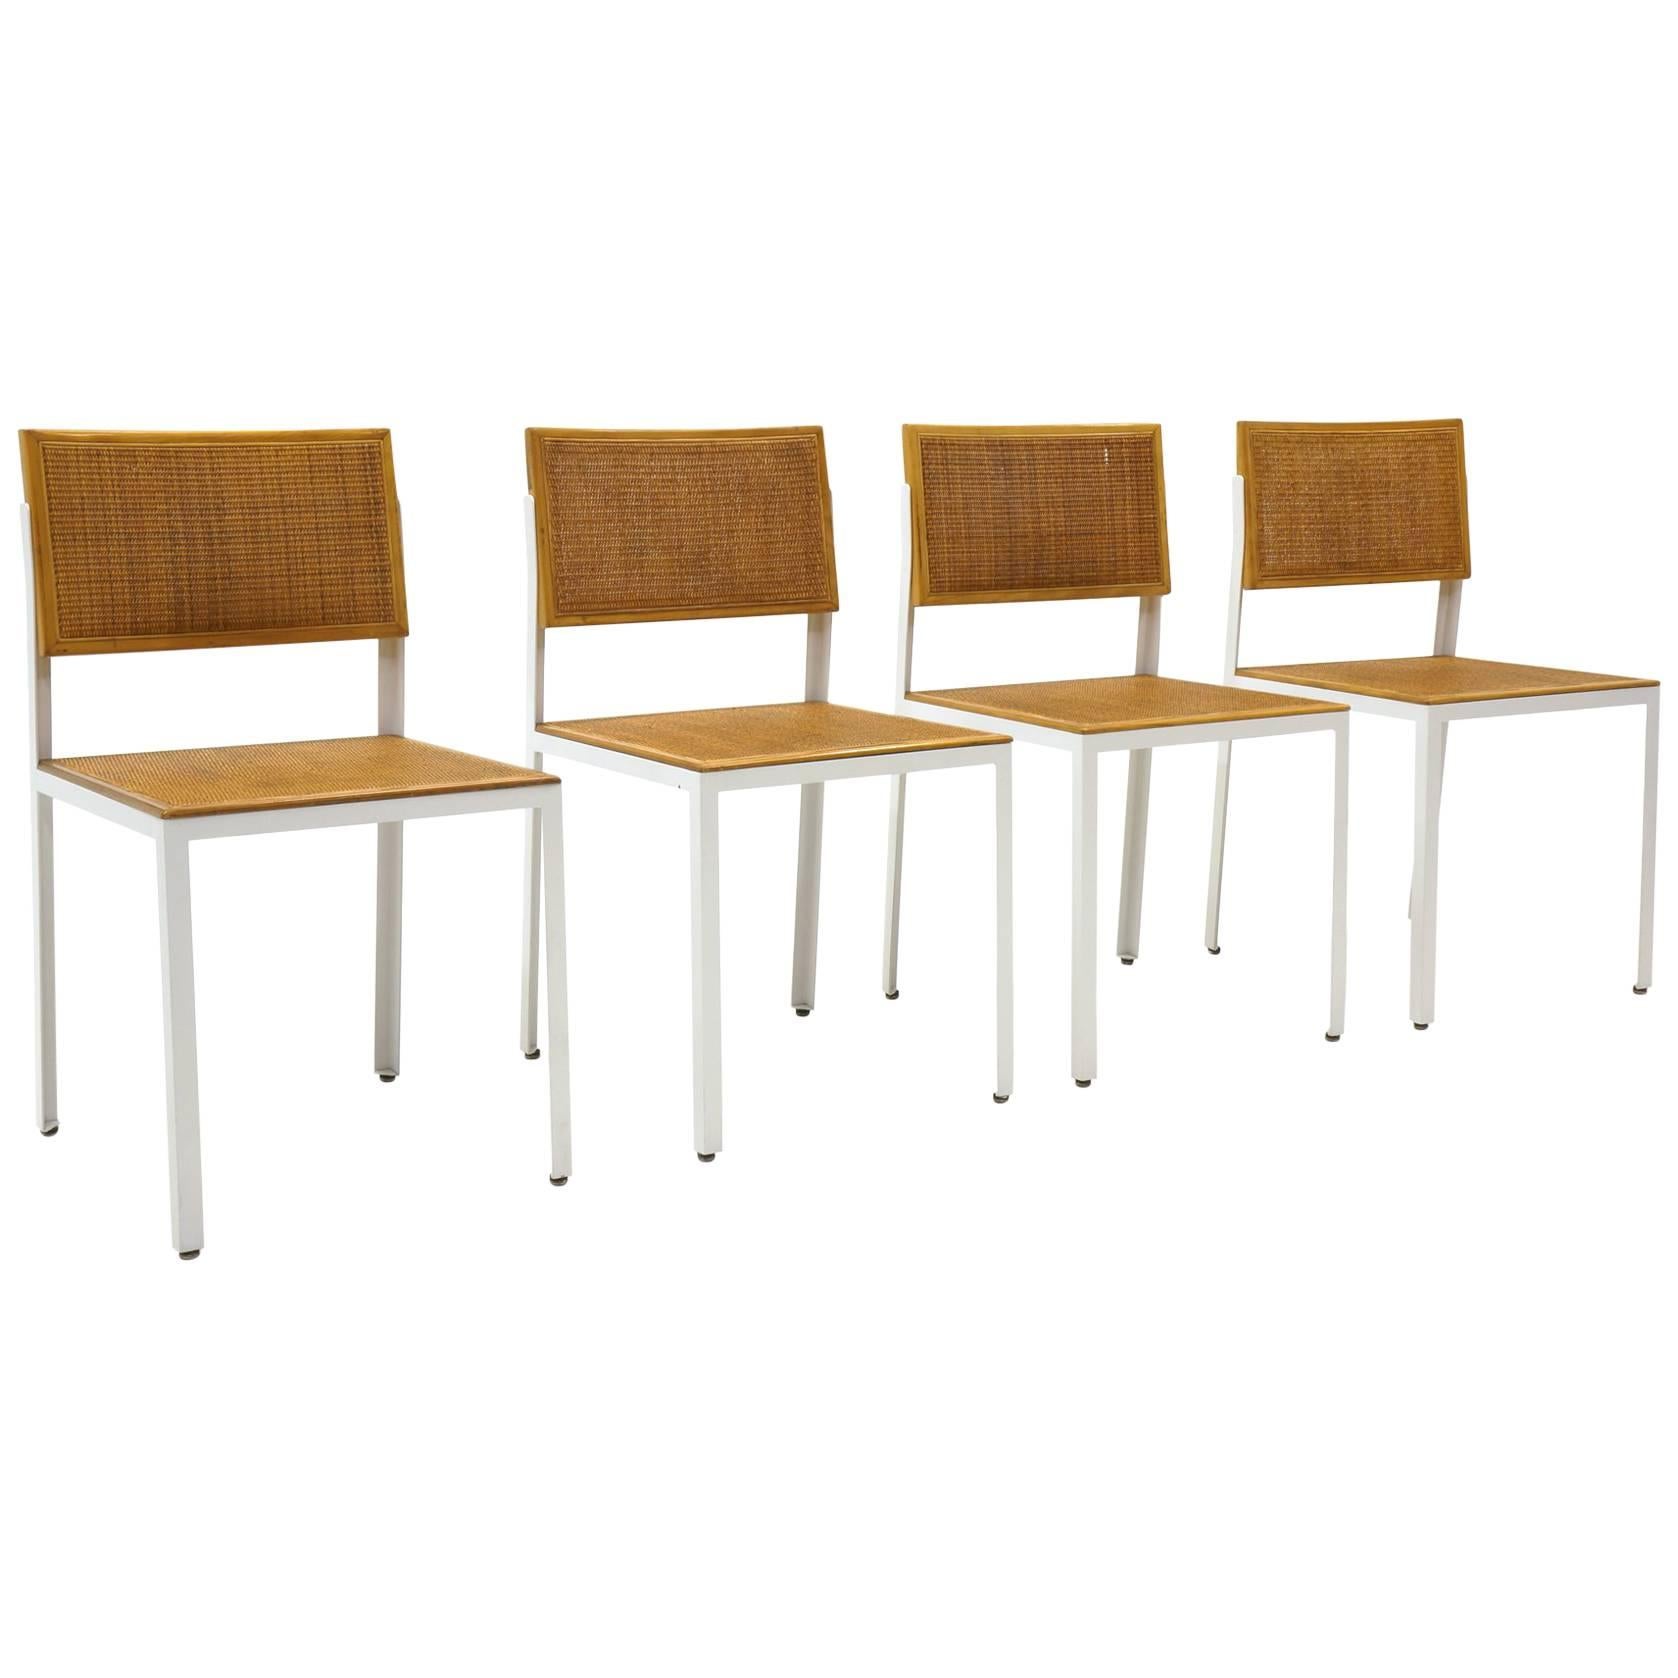 Four Steel Frame Dining Chairs by George Nelson, White Frames, Cane Seats/Backs